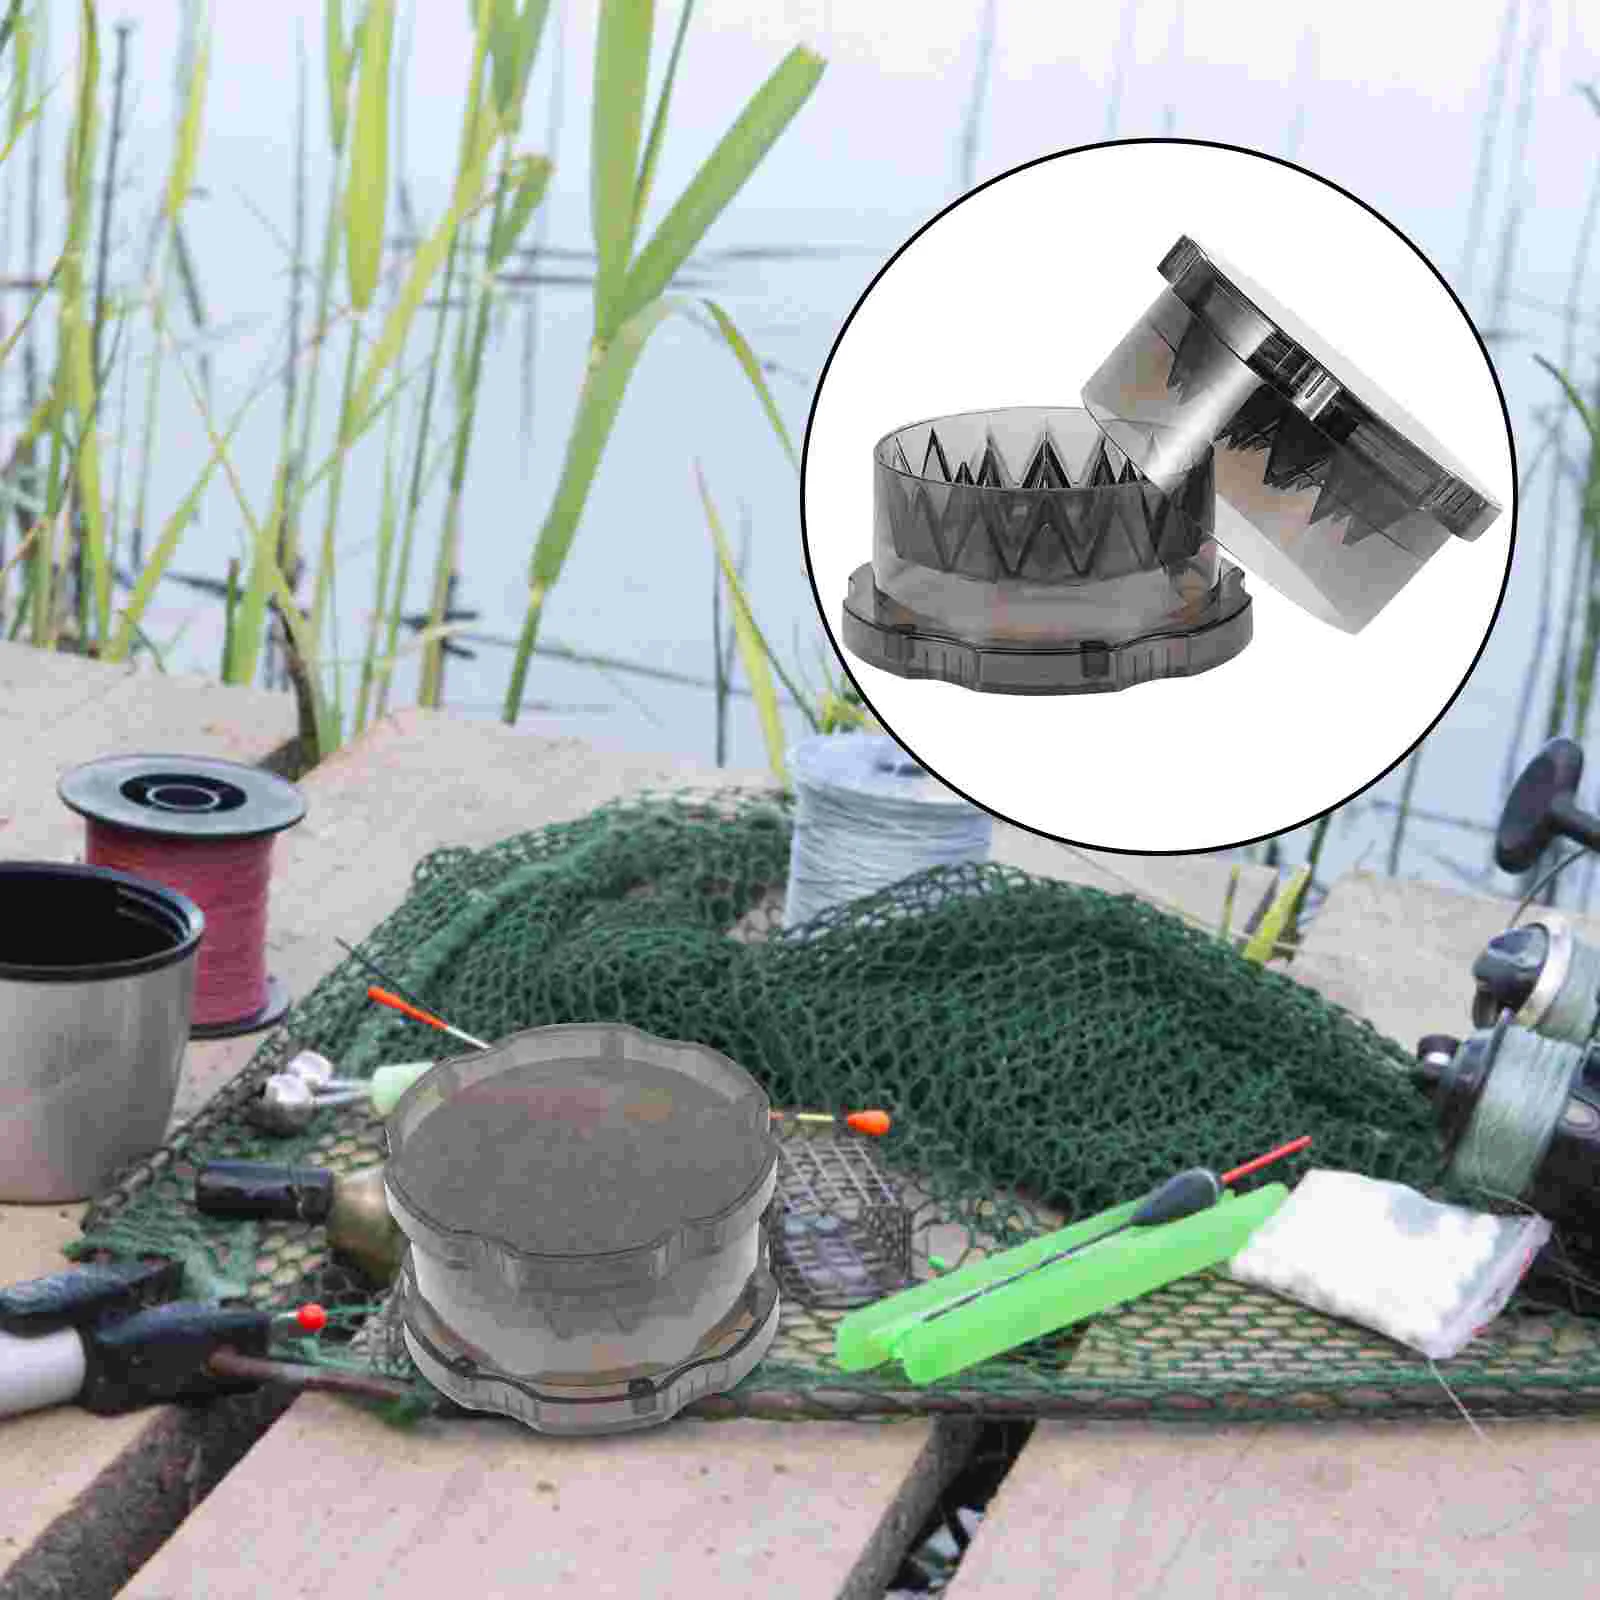 Bait Grinding Box Fishing Supply Boilie Grinder Box Carp Fishing Accessories Plastic Bait Making Tool Library Fishing enlarge